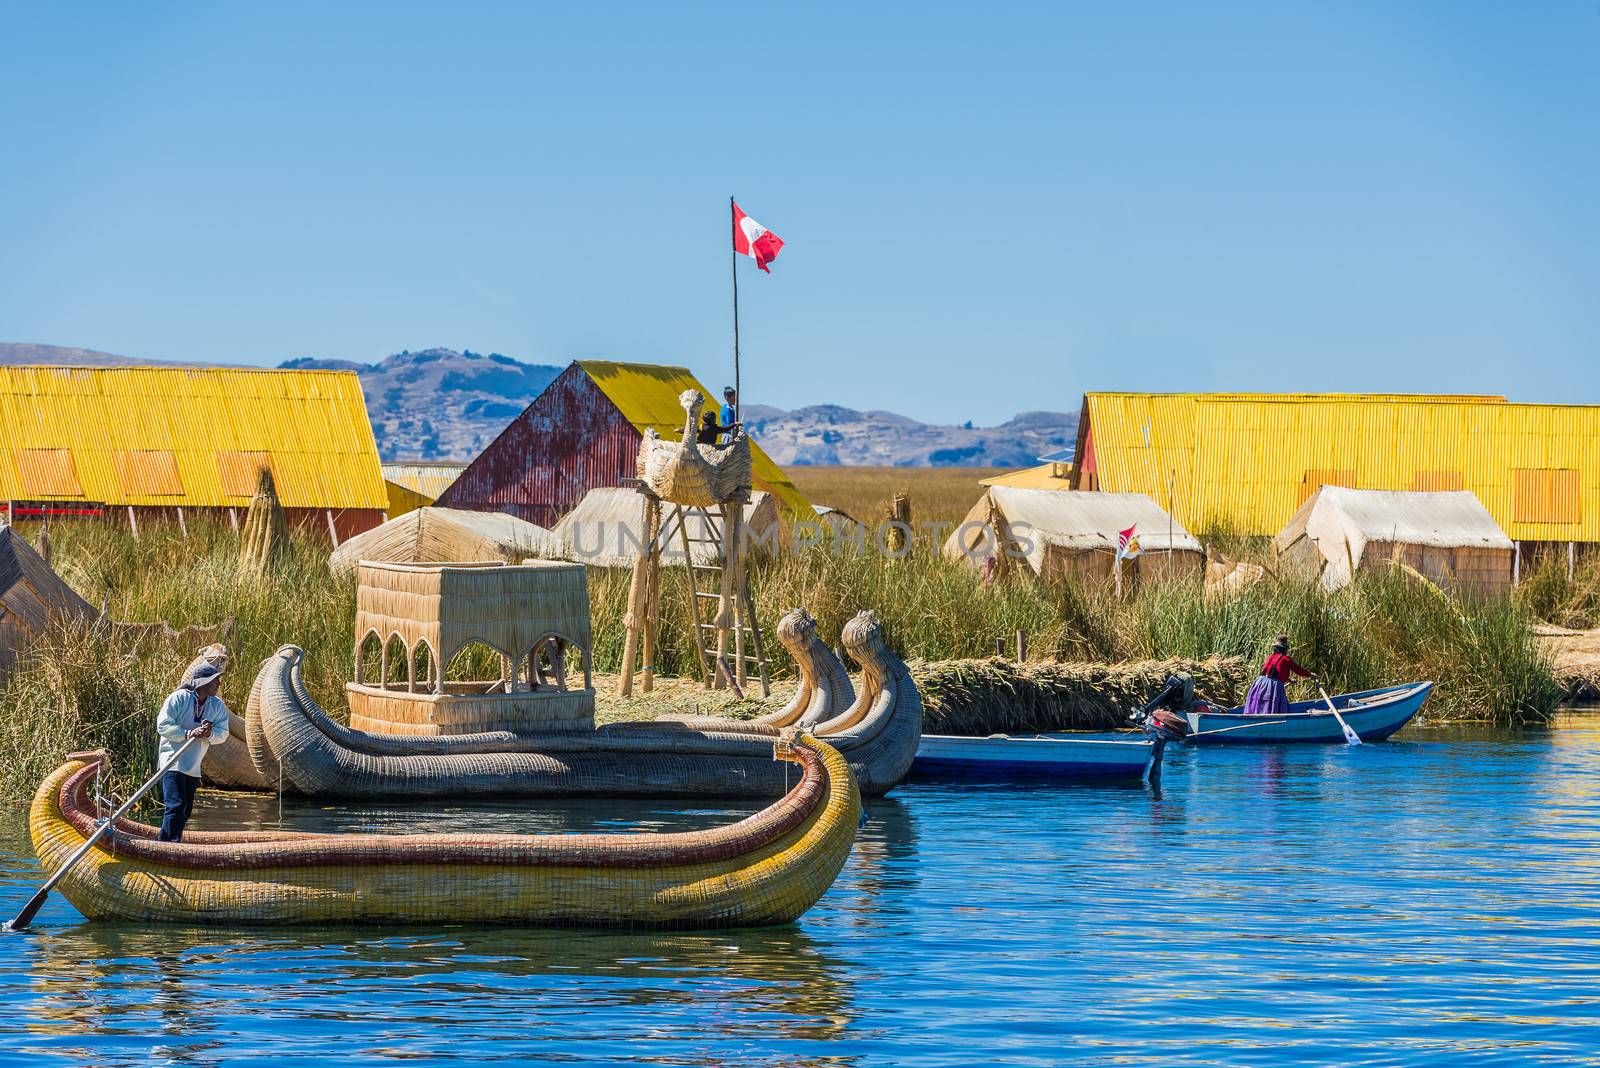 Puno, Peru - July 26, 2013: Uros floating islands in the peruvian Andes at Puno Peru on july 26th, 2013